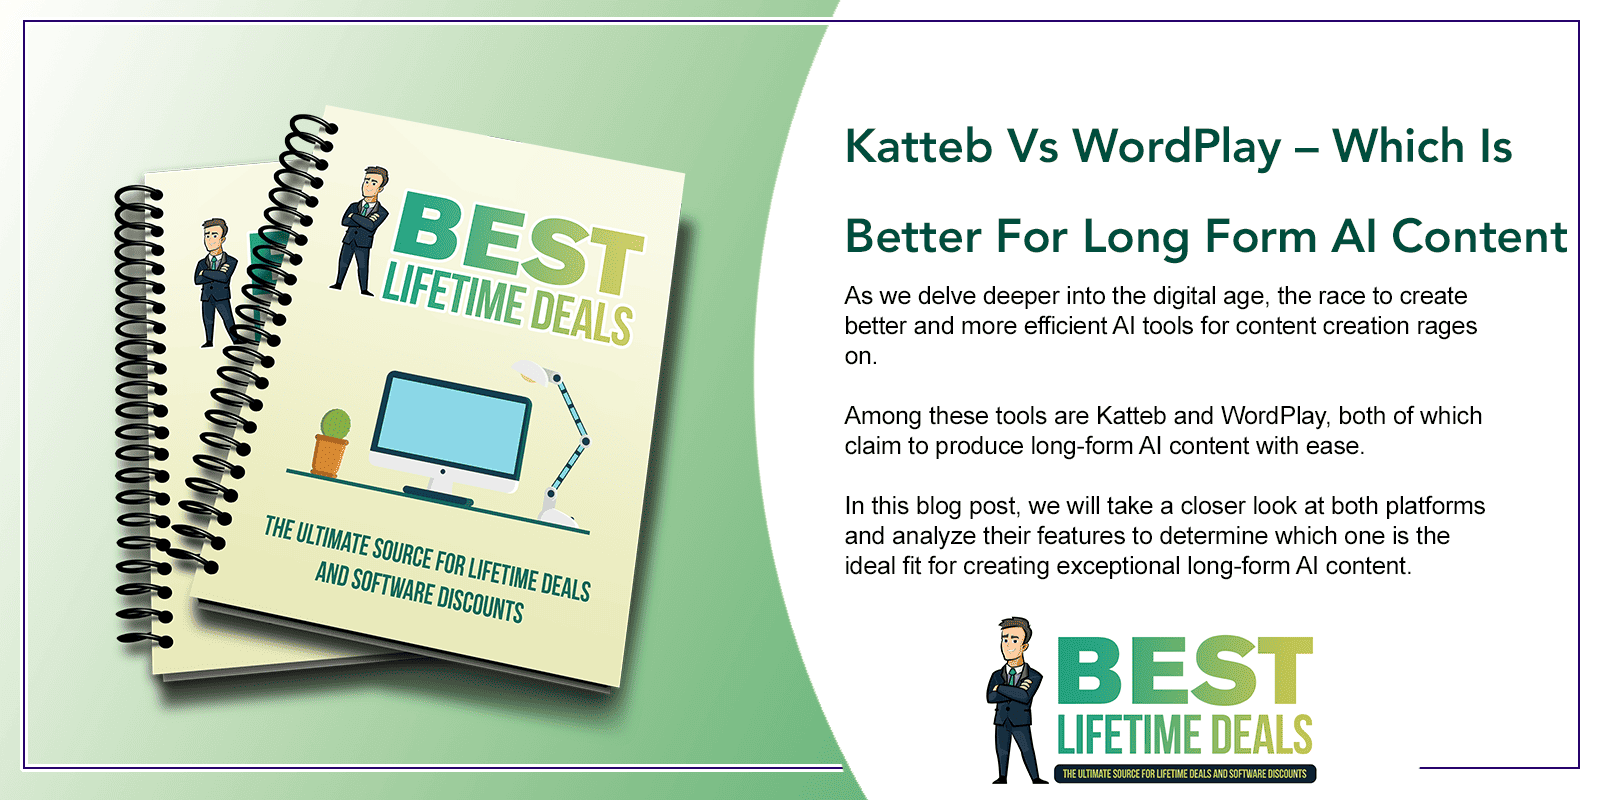 Katteb Vs WordPlay – Which Is Better For Long Form AI Content